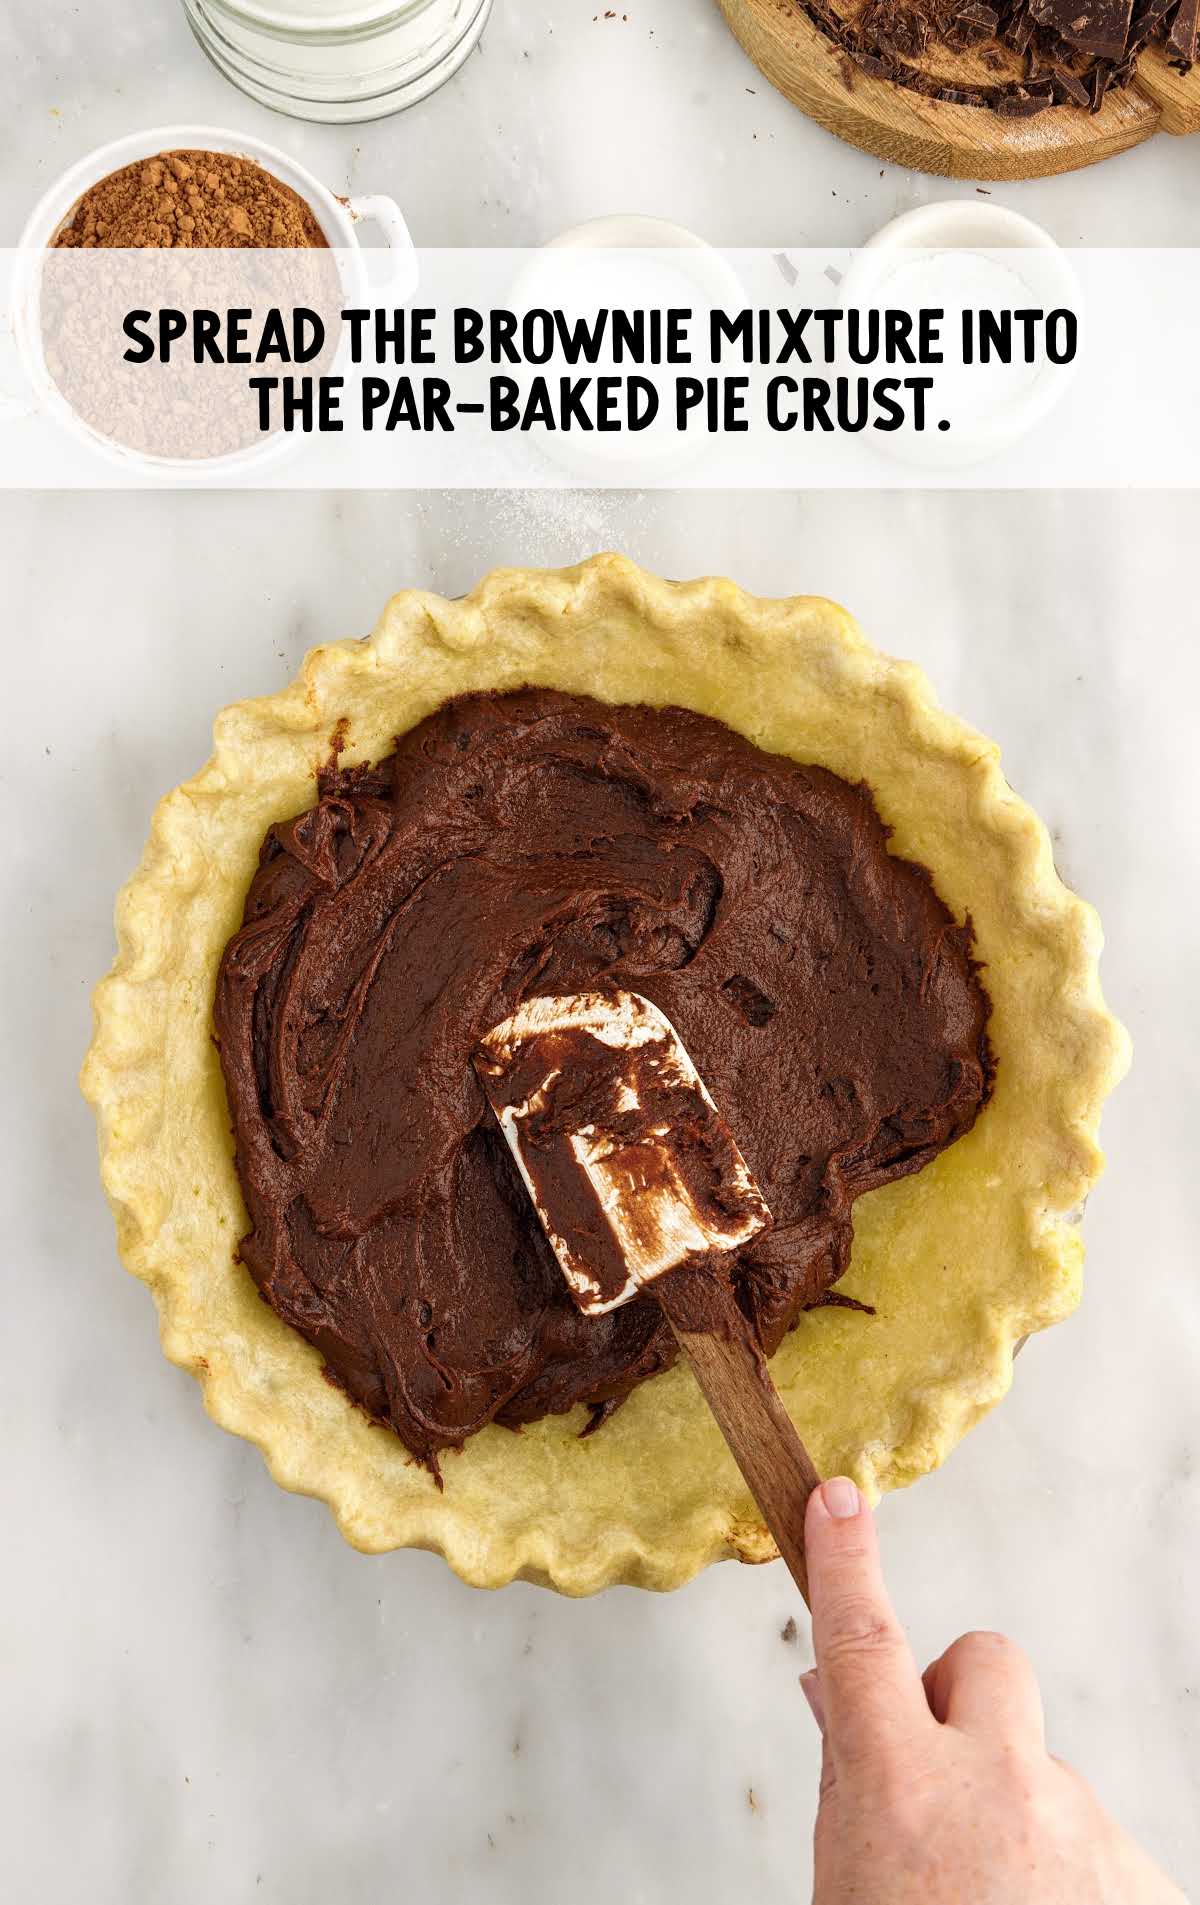 brownie mixture spread into the par-baked pie crust